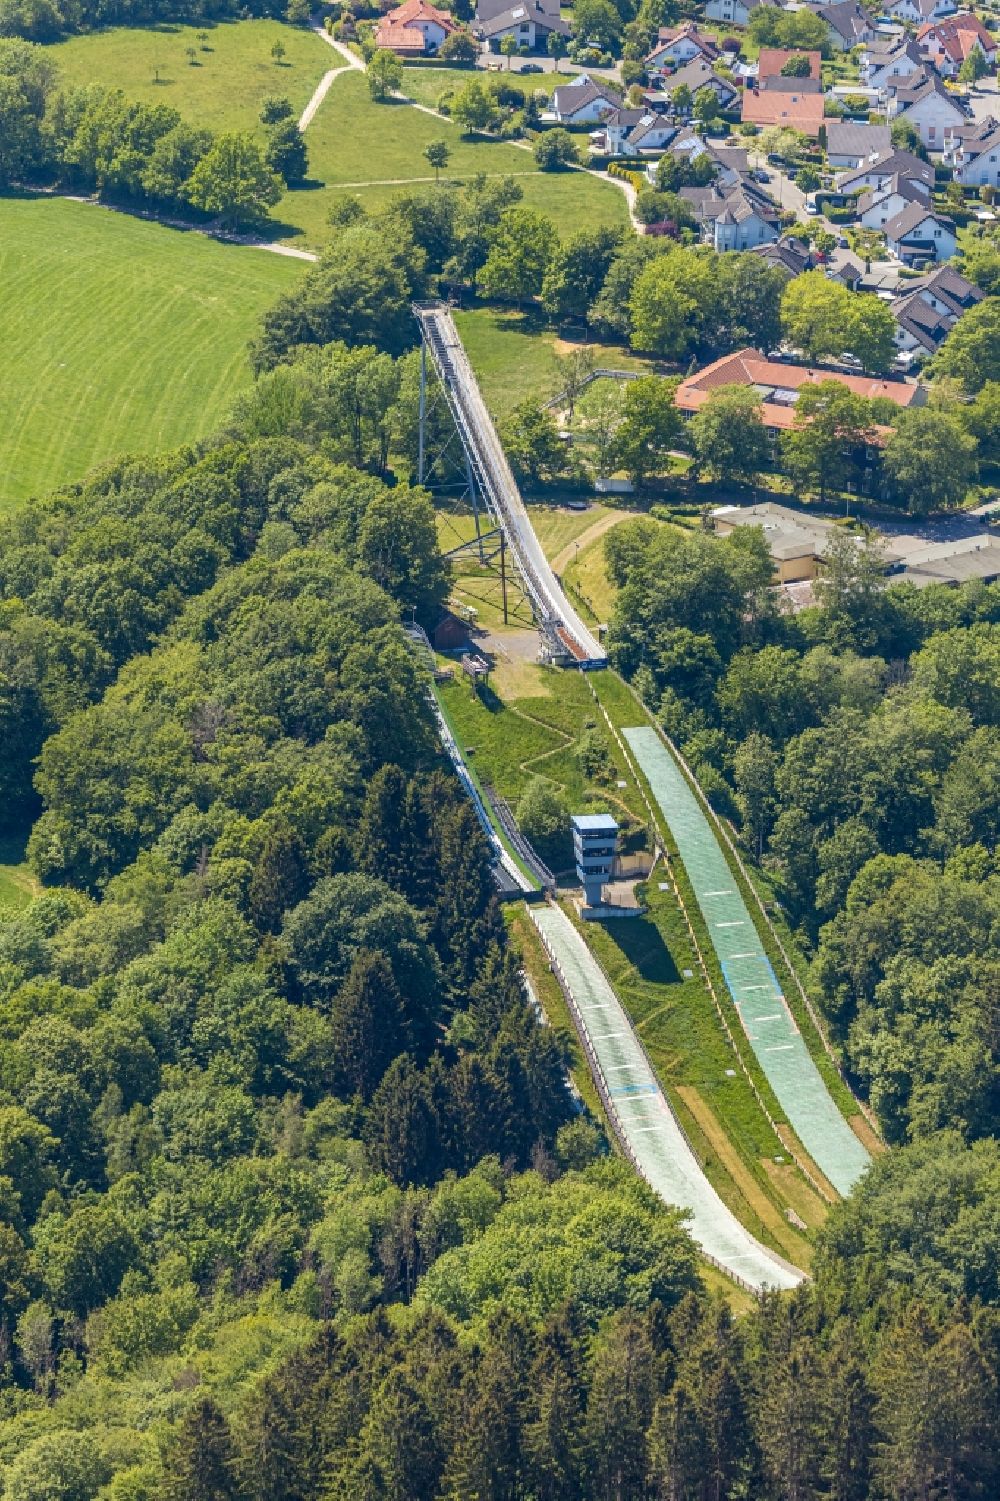 Meinerzhagen from the bird's eye view: Training and competitive sports center of the ski jump in Meinerzhagen in the state North Rhine-Westphalia, Germany